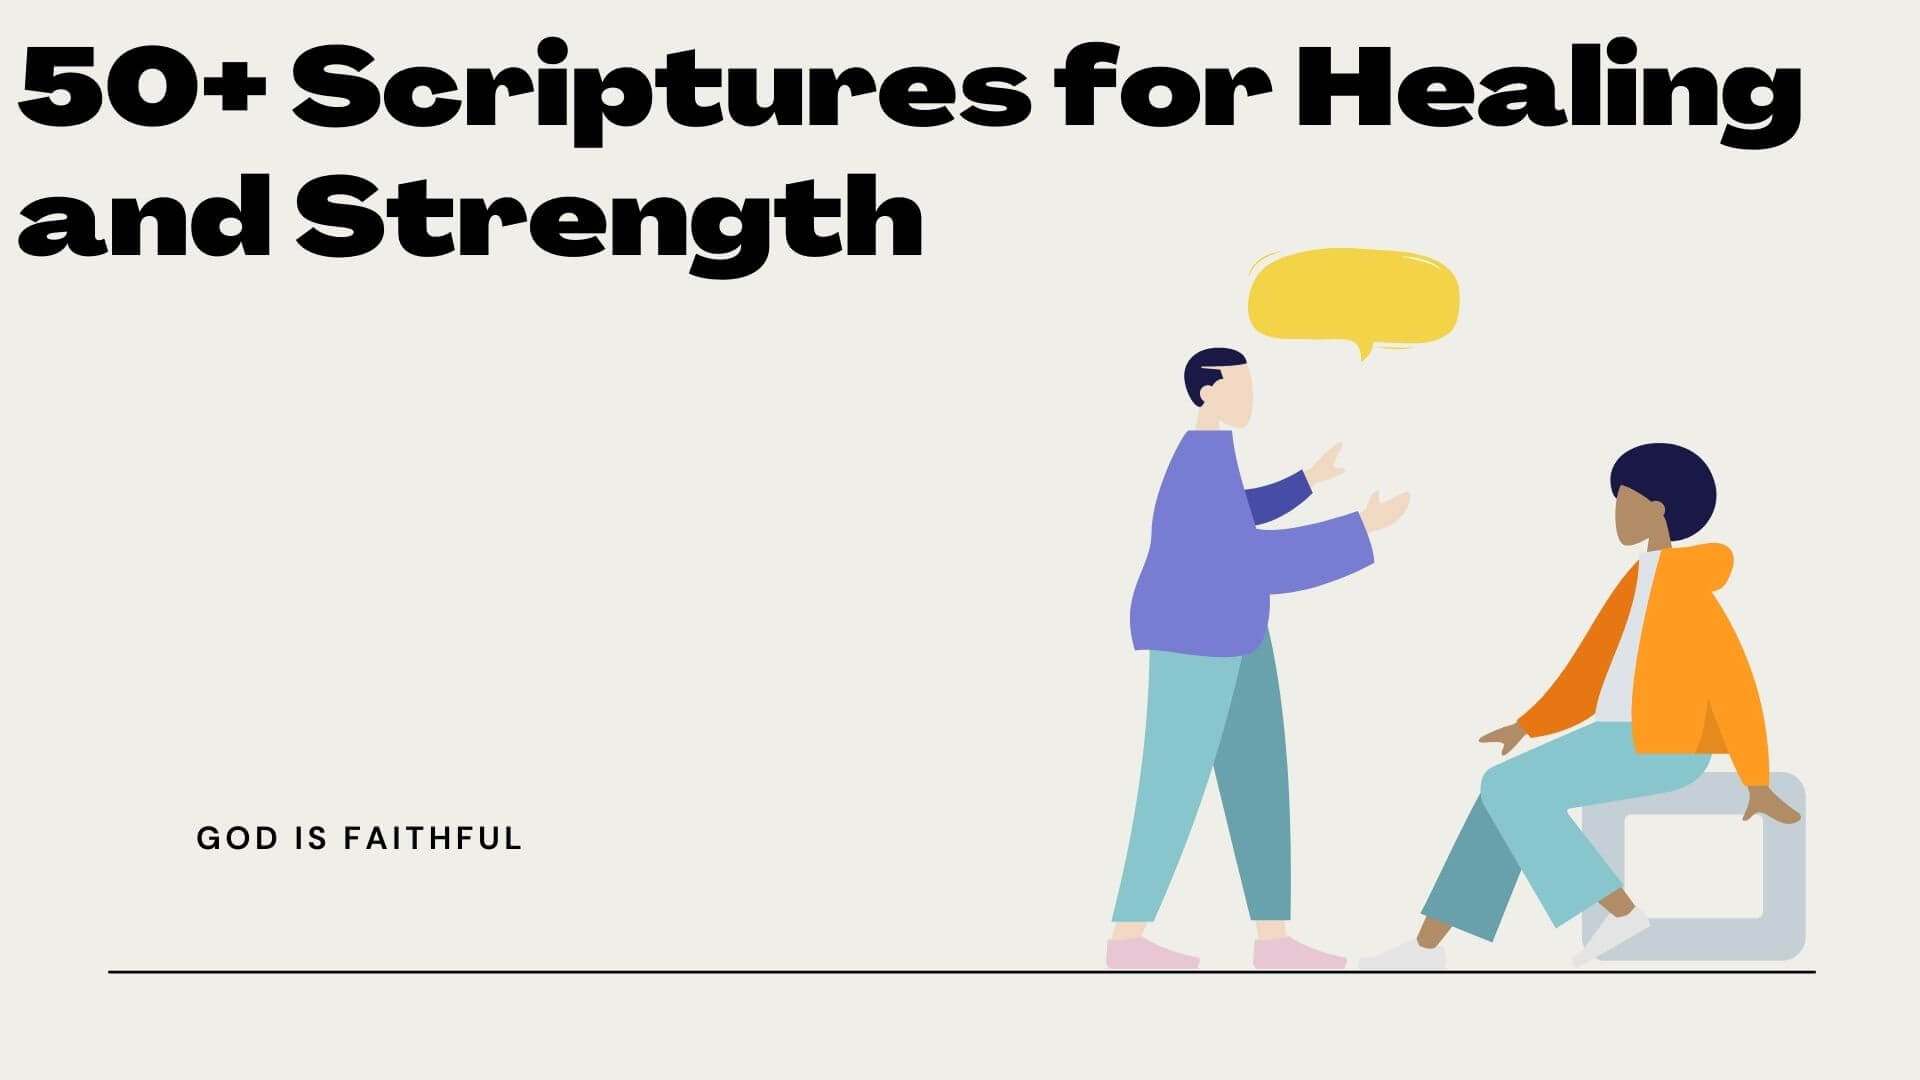 Scriptures for Healing and Strength